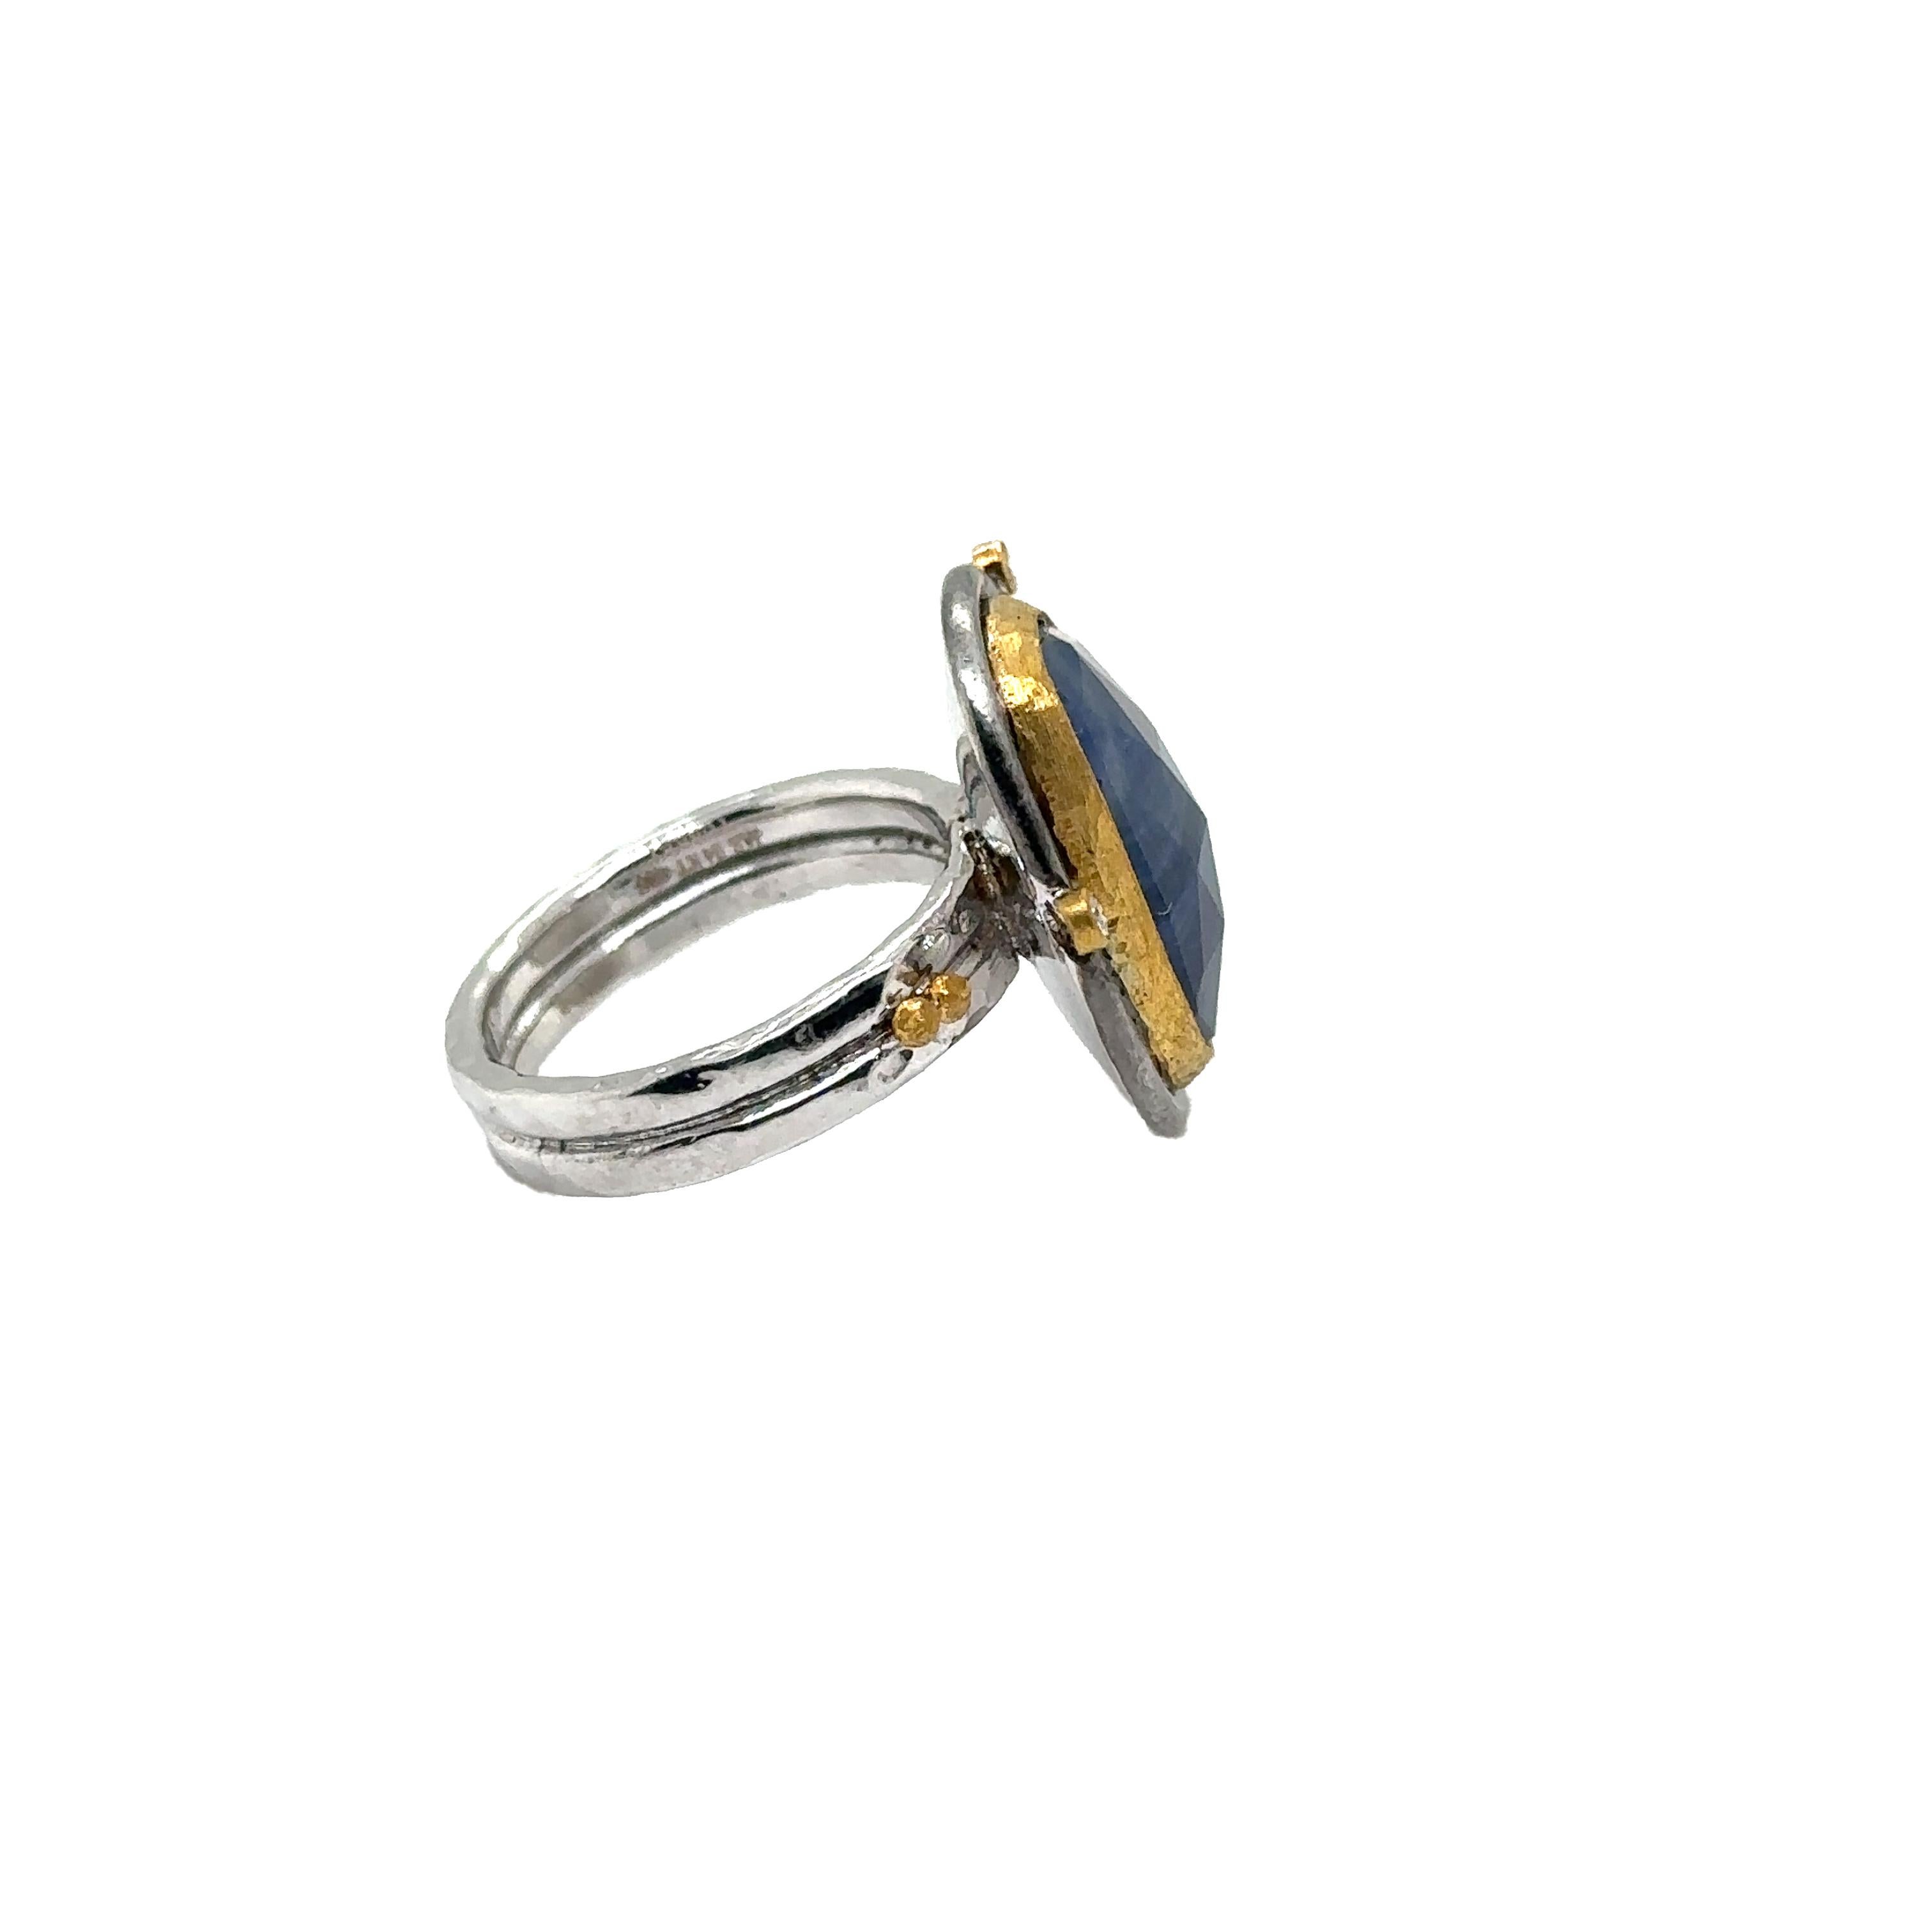 24K/SS HANDMADE 18X13MM NATURAL CHECKERBOARD SLICE BLUE SAPPHIRE RING WITH DIAMOND

Metal: 24K gold/SS
Dia Info: GH-SI DIAMOND 0.04 CTW
Stone Info: 18X13MM NATURAL CHECKERBOARD SLICE BLUE SAPPHIRE
Total Dia Weight: 0.04 cwt.
Total Stone Weight: